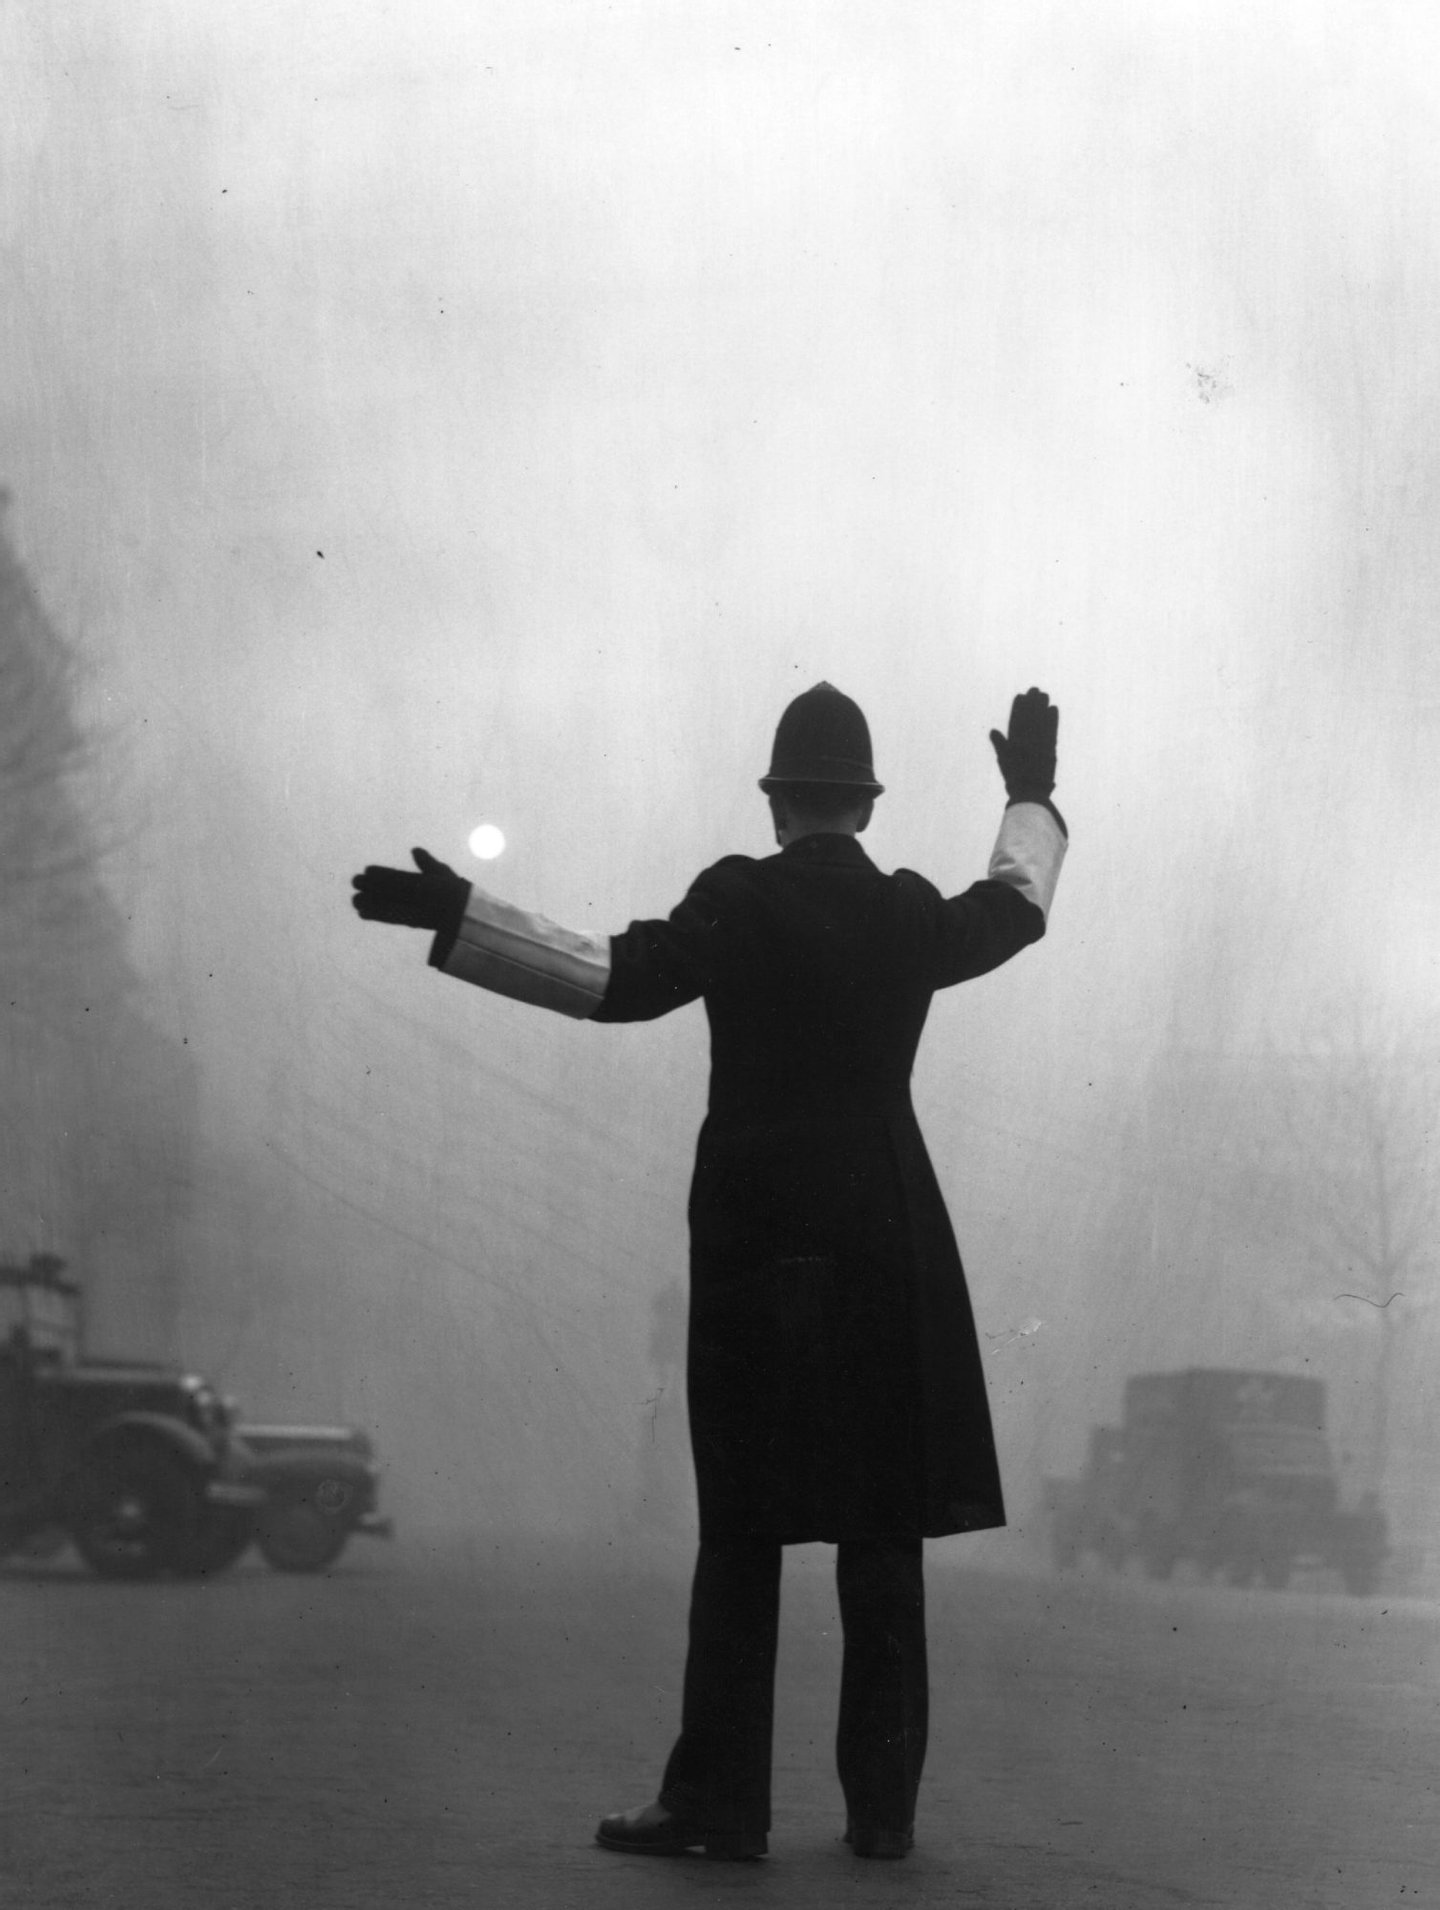 A policeman on traffic duty on a foggy day in Fleet Street, London. (Photo by Hulton Archive/Getty Images)